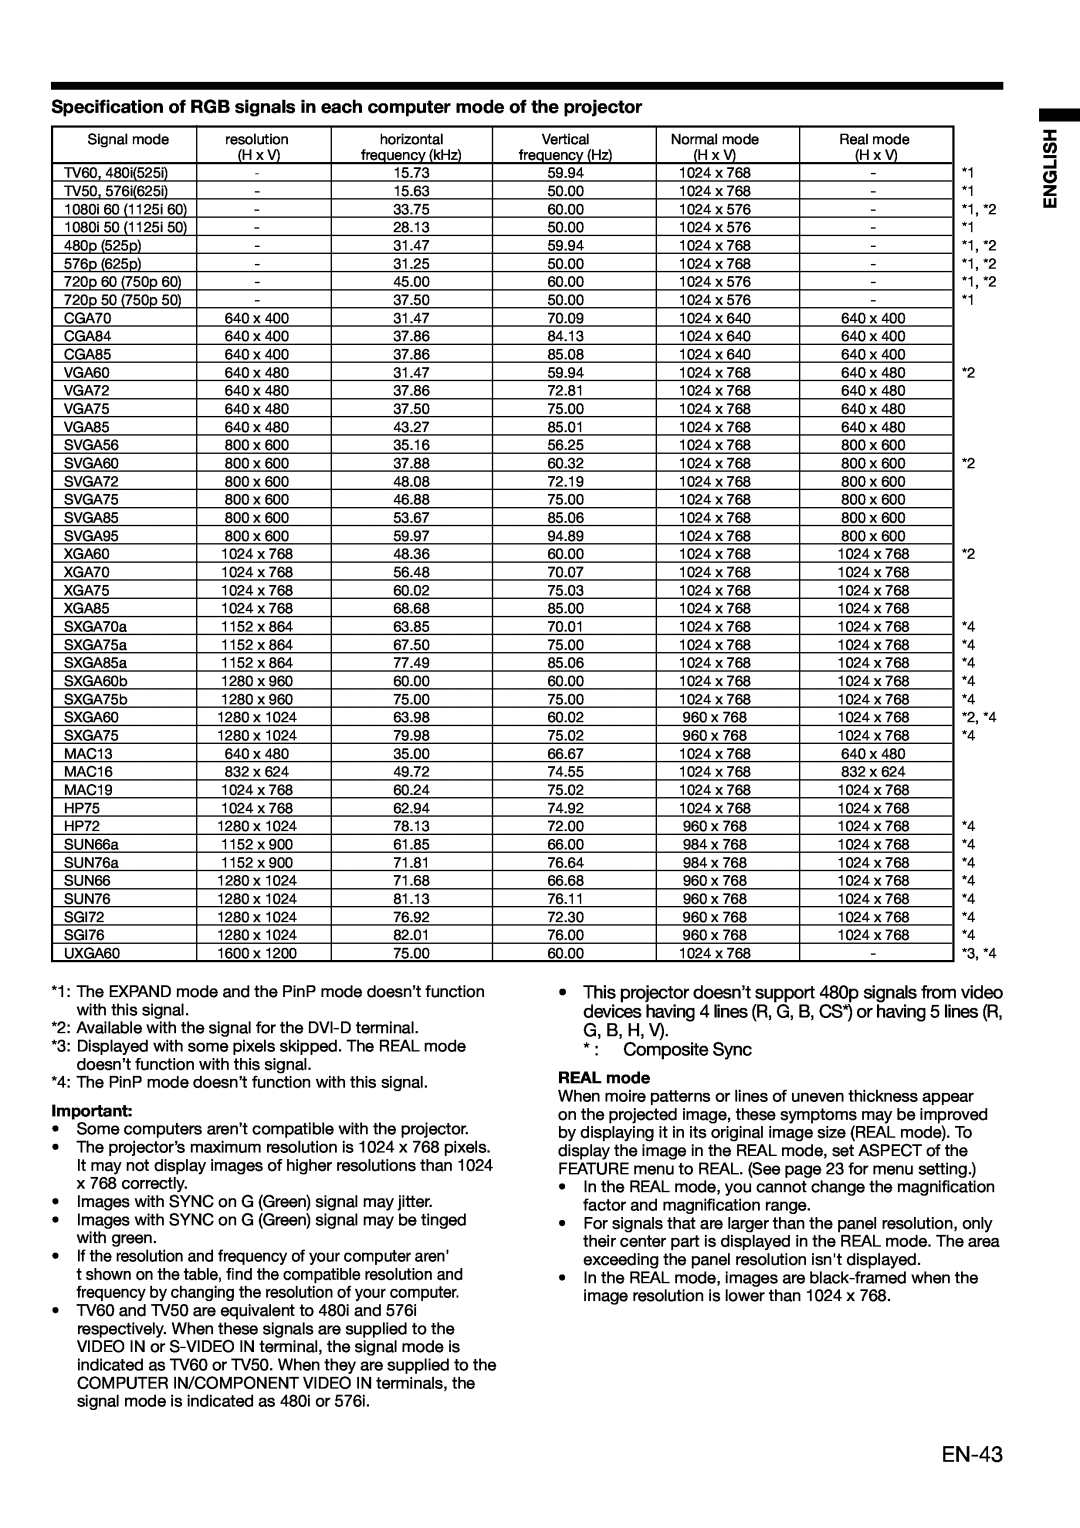 Mitsubishi Electronics XL650U EN-43, Speciﬁcation of RGB signals in each computer mode of the projector, English 